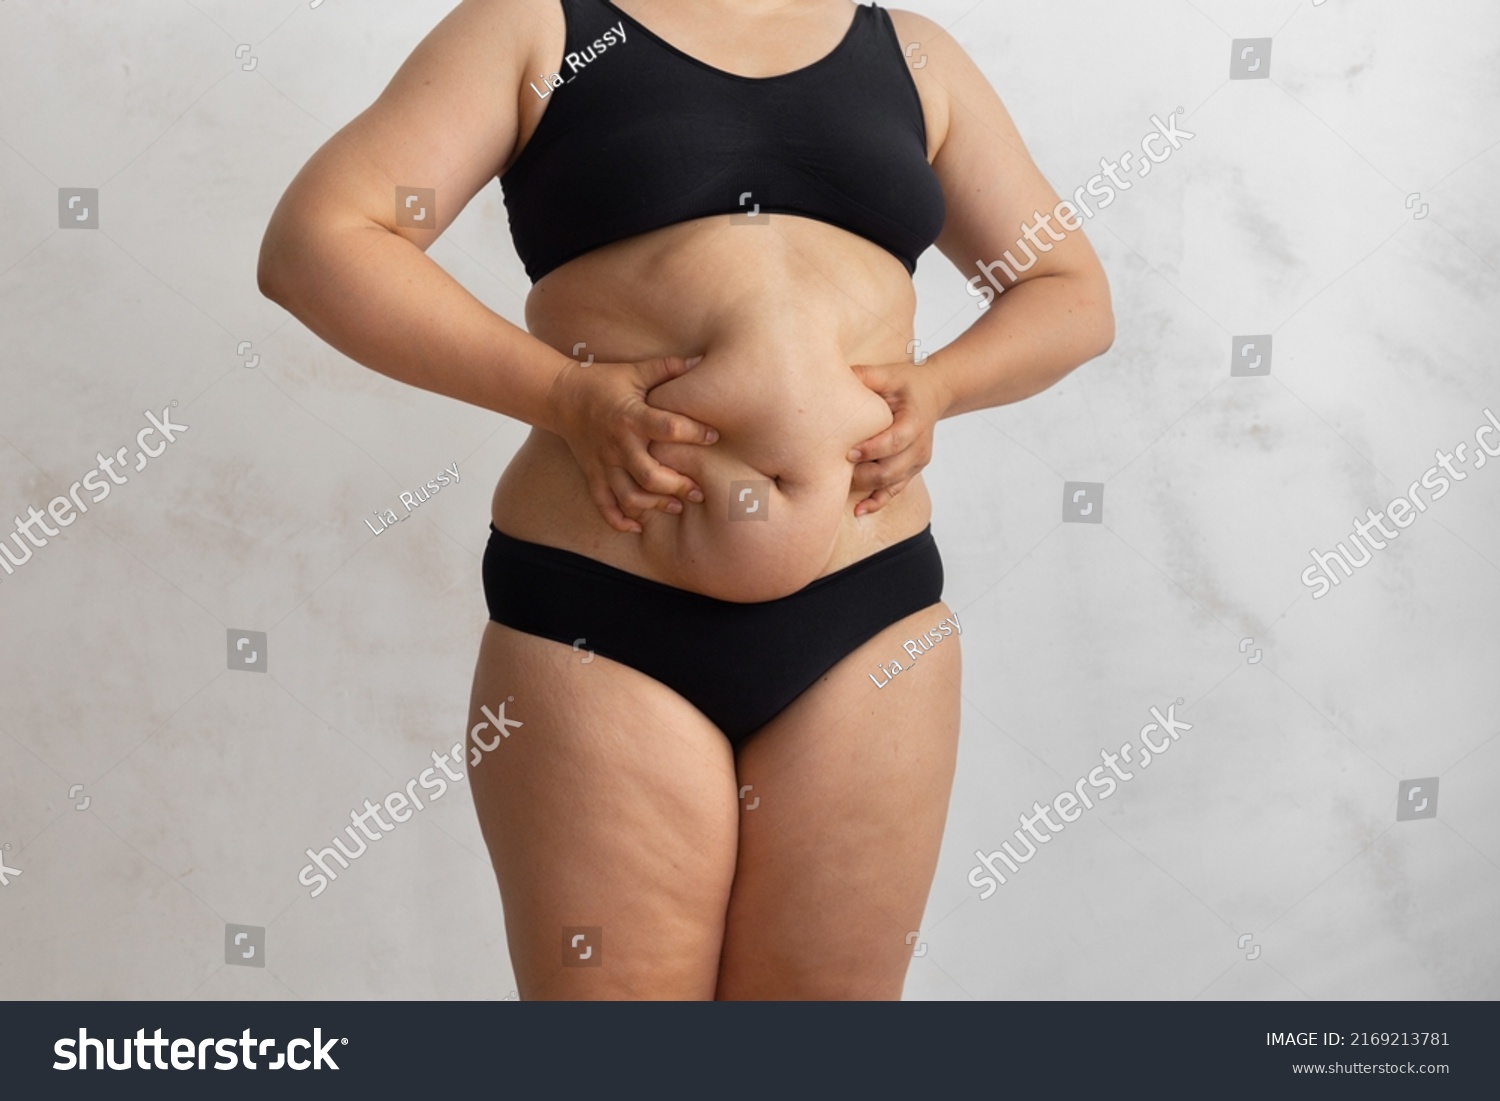 Stock Photo Unrecognizable Overweight Obese Woman In Black Bikini Touching And Squeezing Big Dangling Tummy 2169213781 